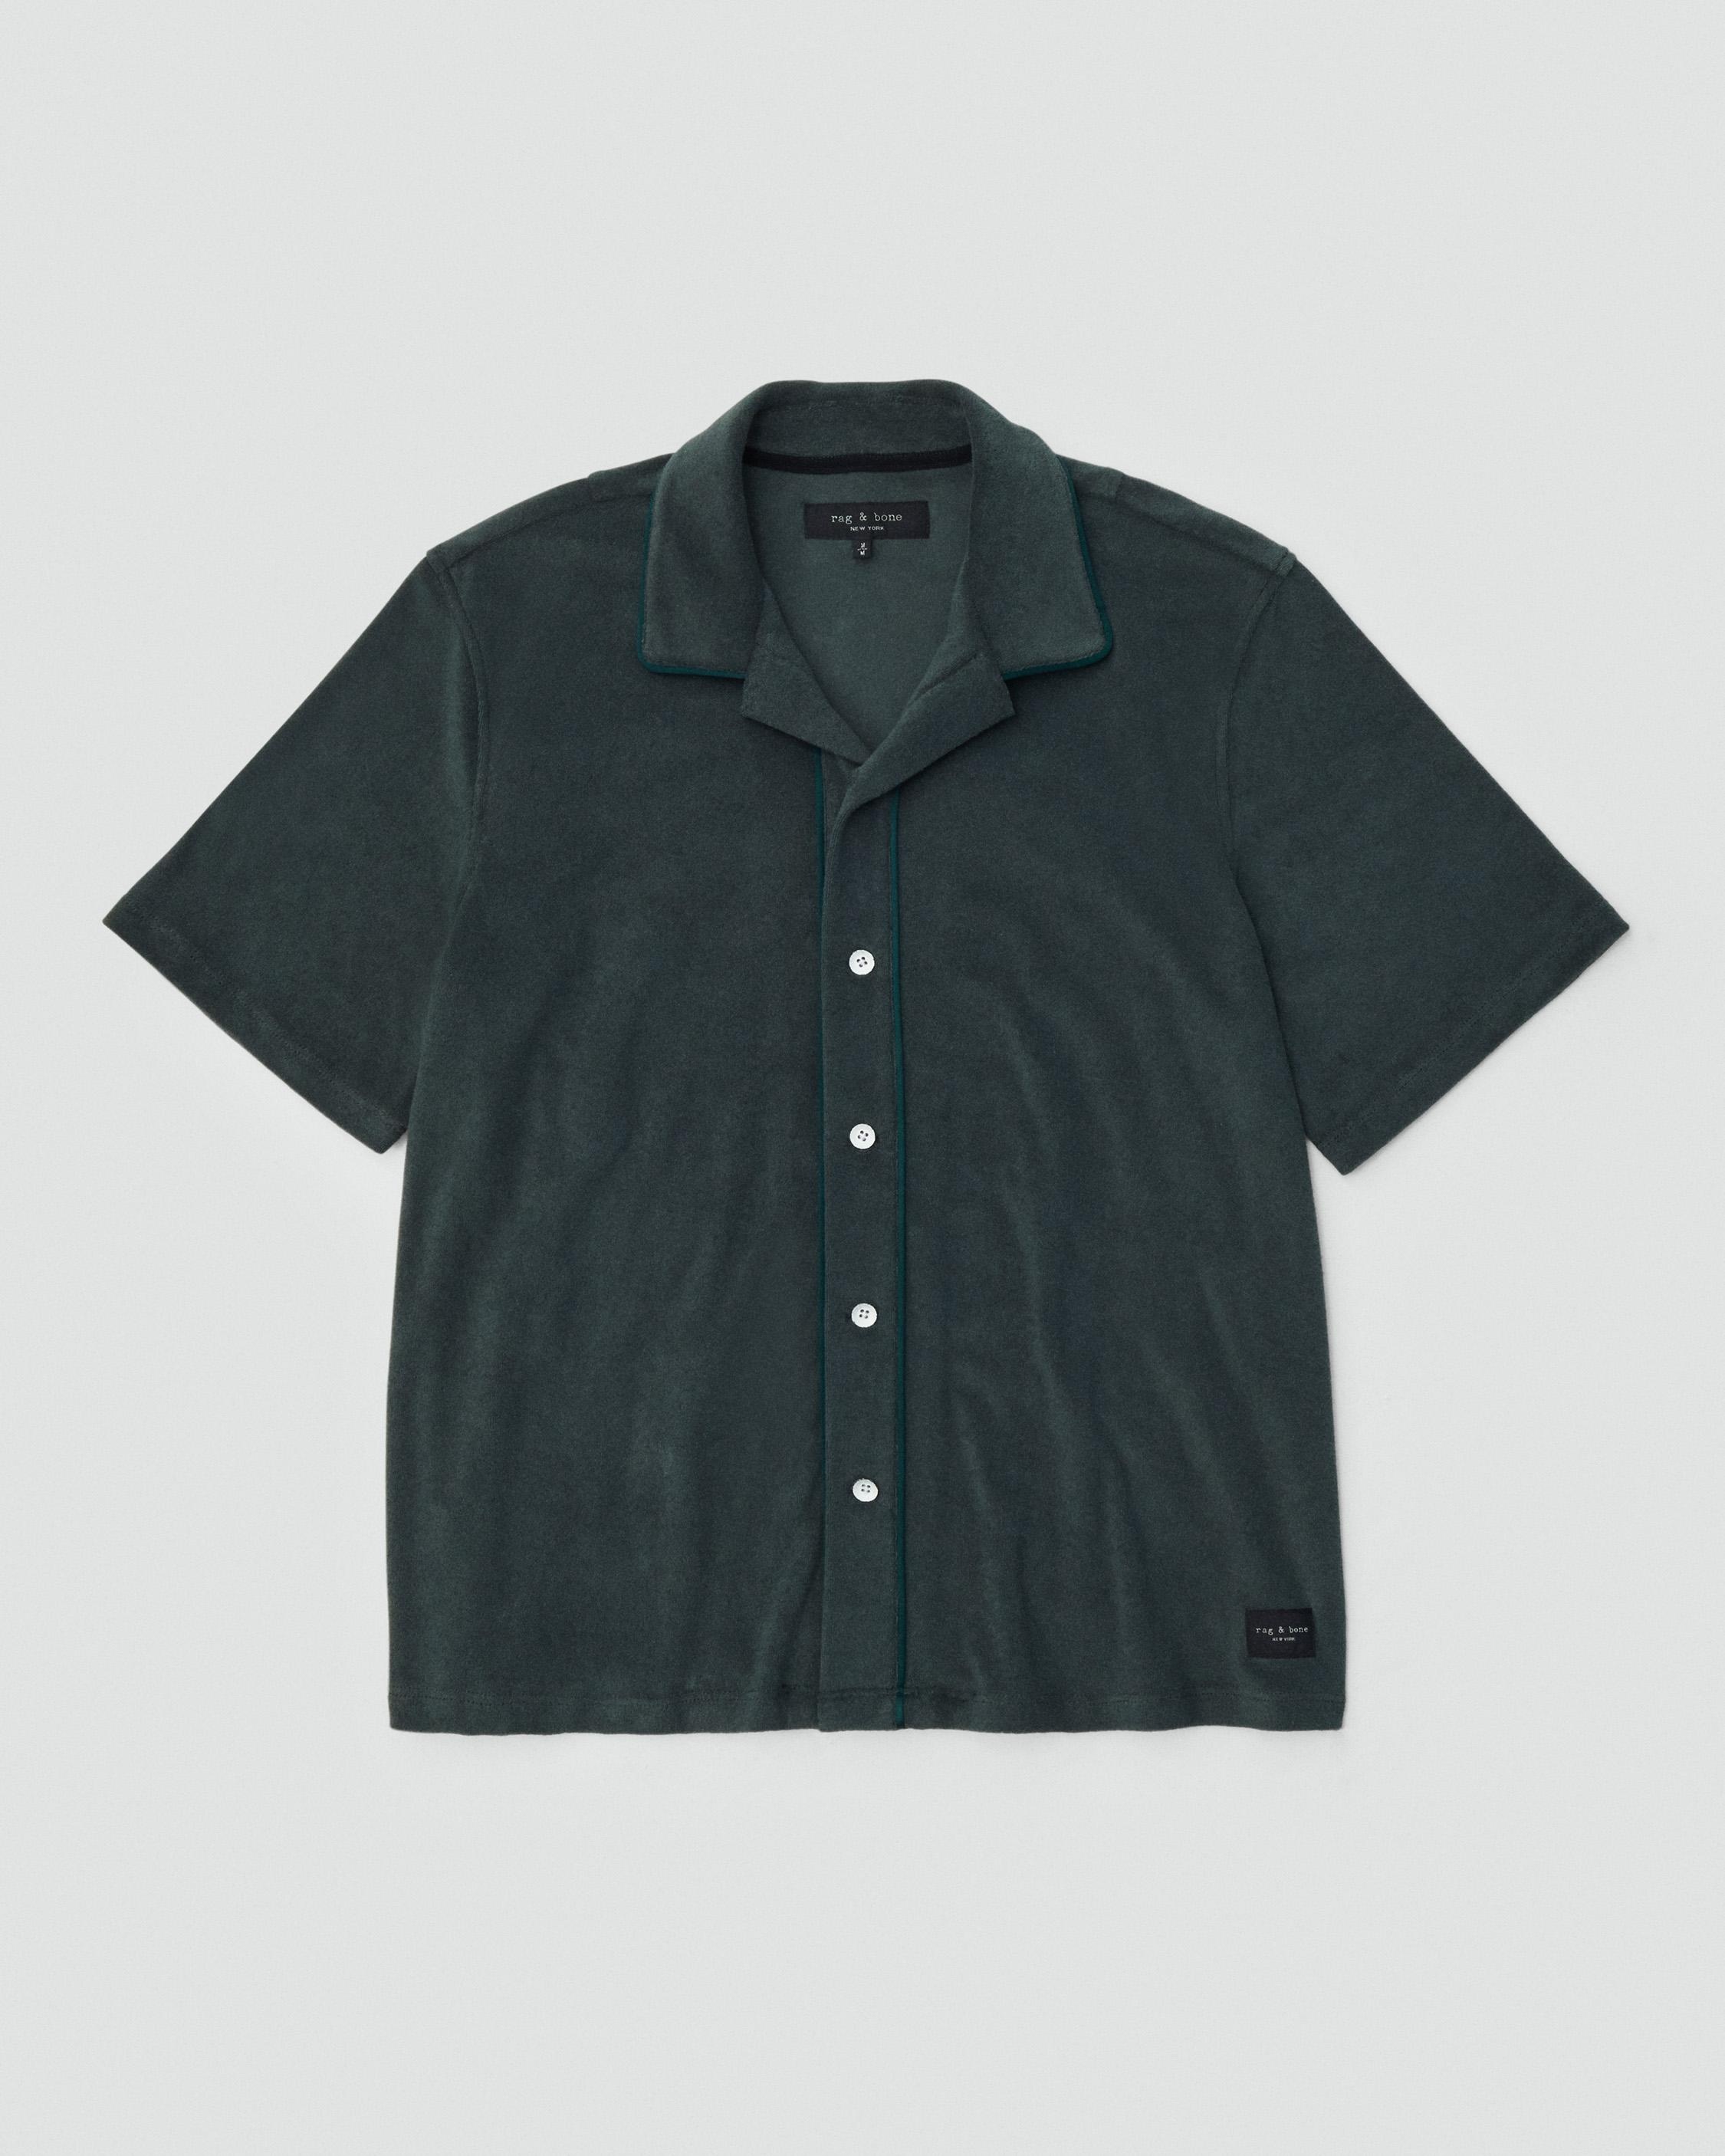 Avery Toweling Shirt
Classic Fit Button Down - 1